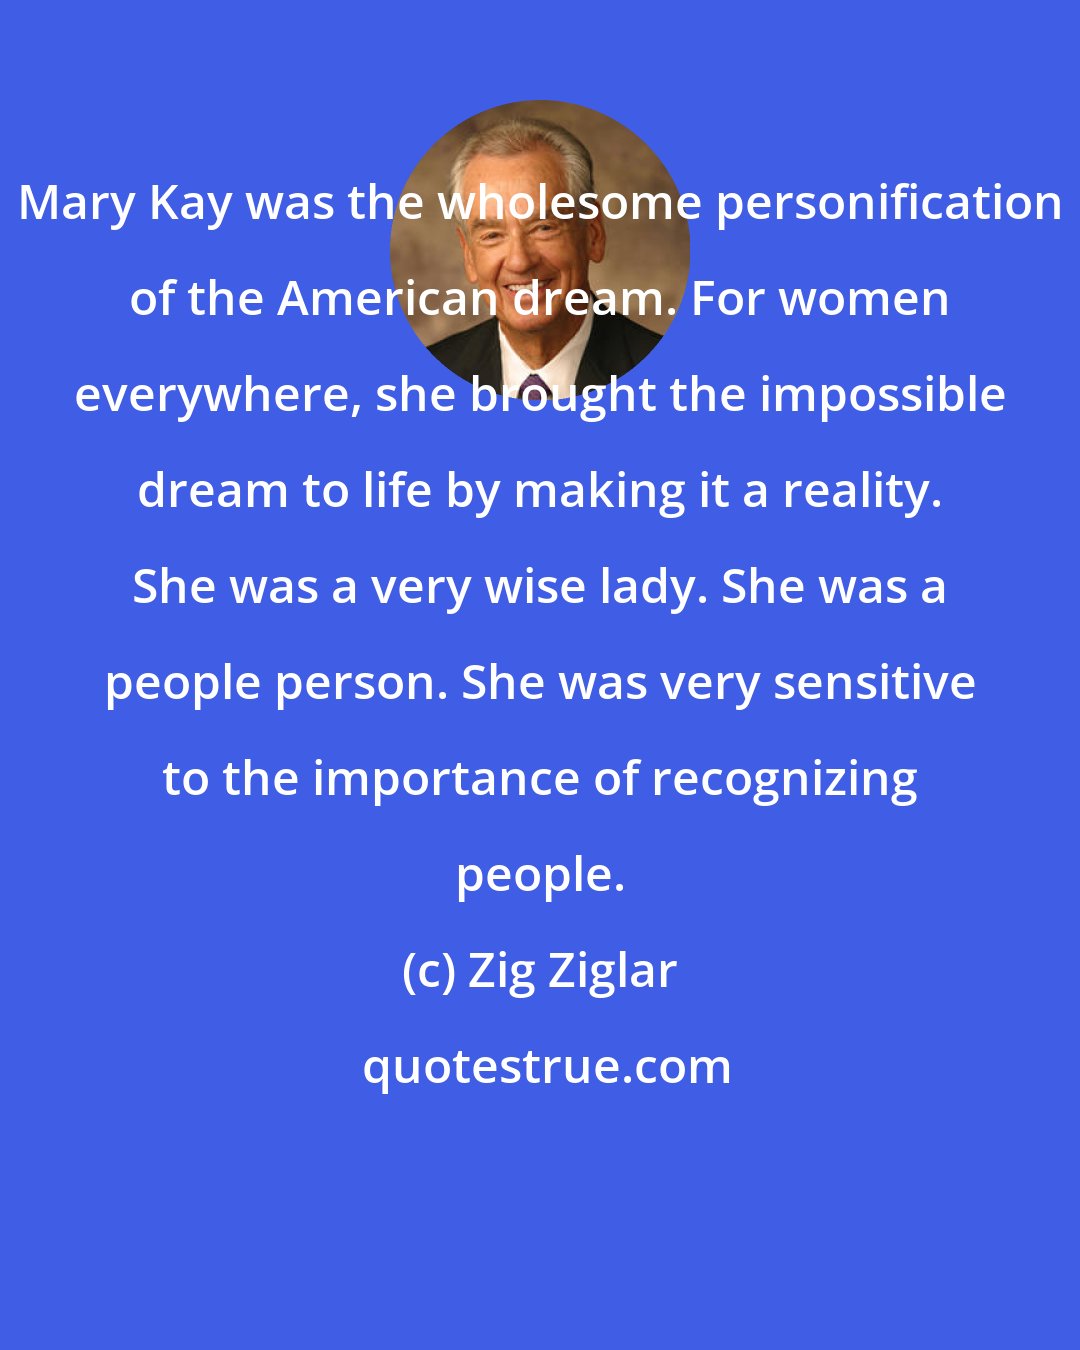 Zig Ziglar: Mary Kay was the wholesome personification of the American dream. For women everywhere, she brought the impossible dream to life by making it a reality. She was a very wise lady. She was a people person. She was very sensitive to the importance of recognizing people.